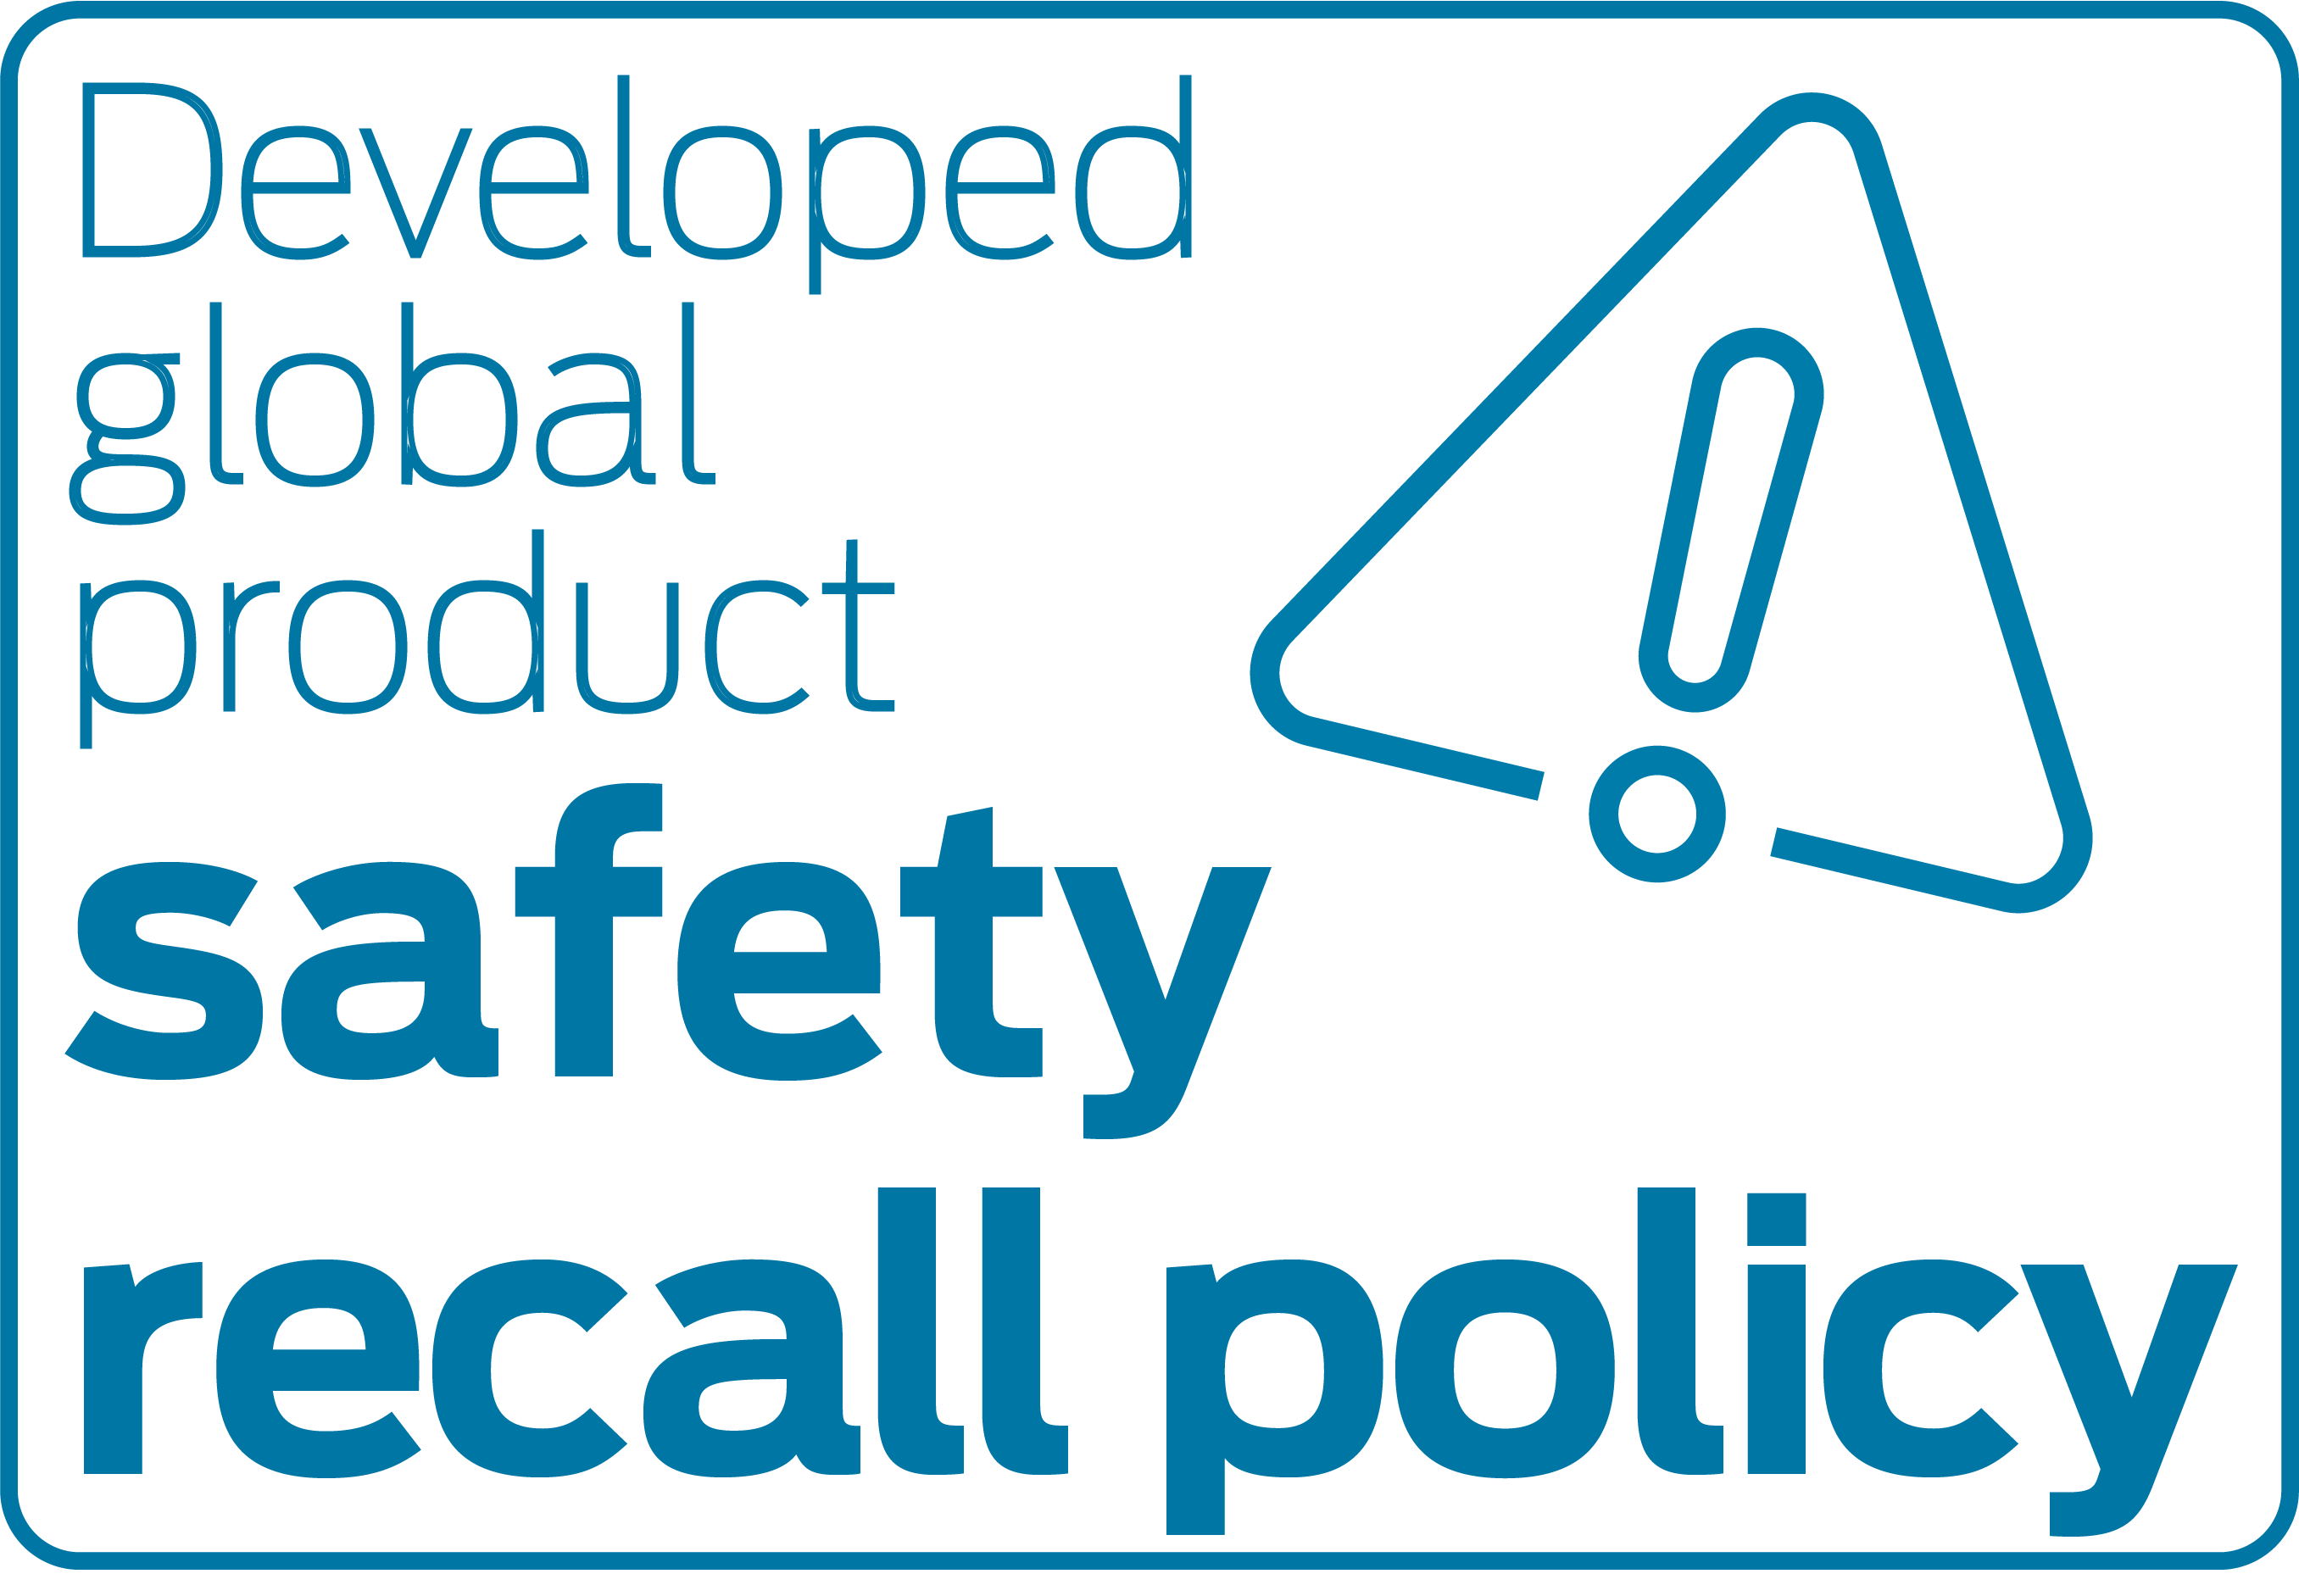 Developed global product safety recall policy